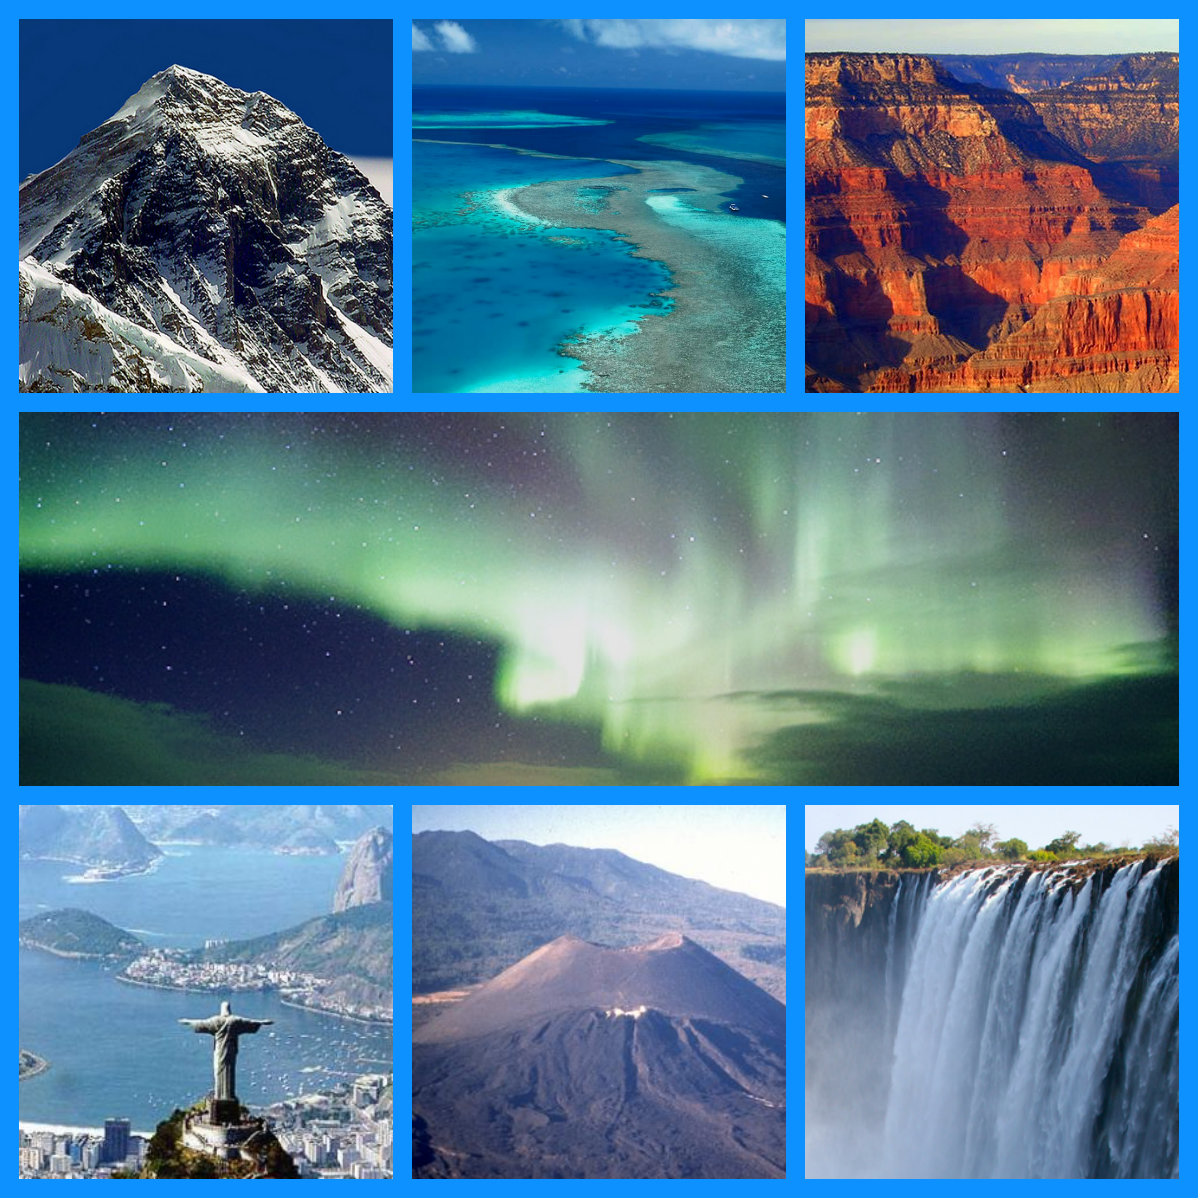 7 natural wonders of the world list - DriverLayer Search Engine